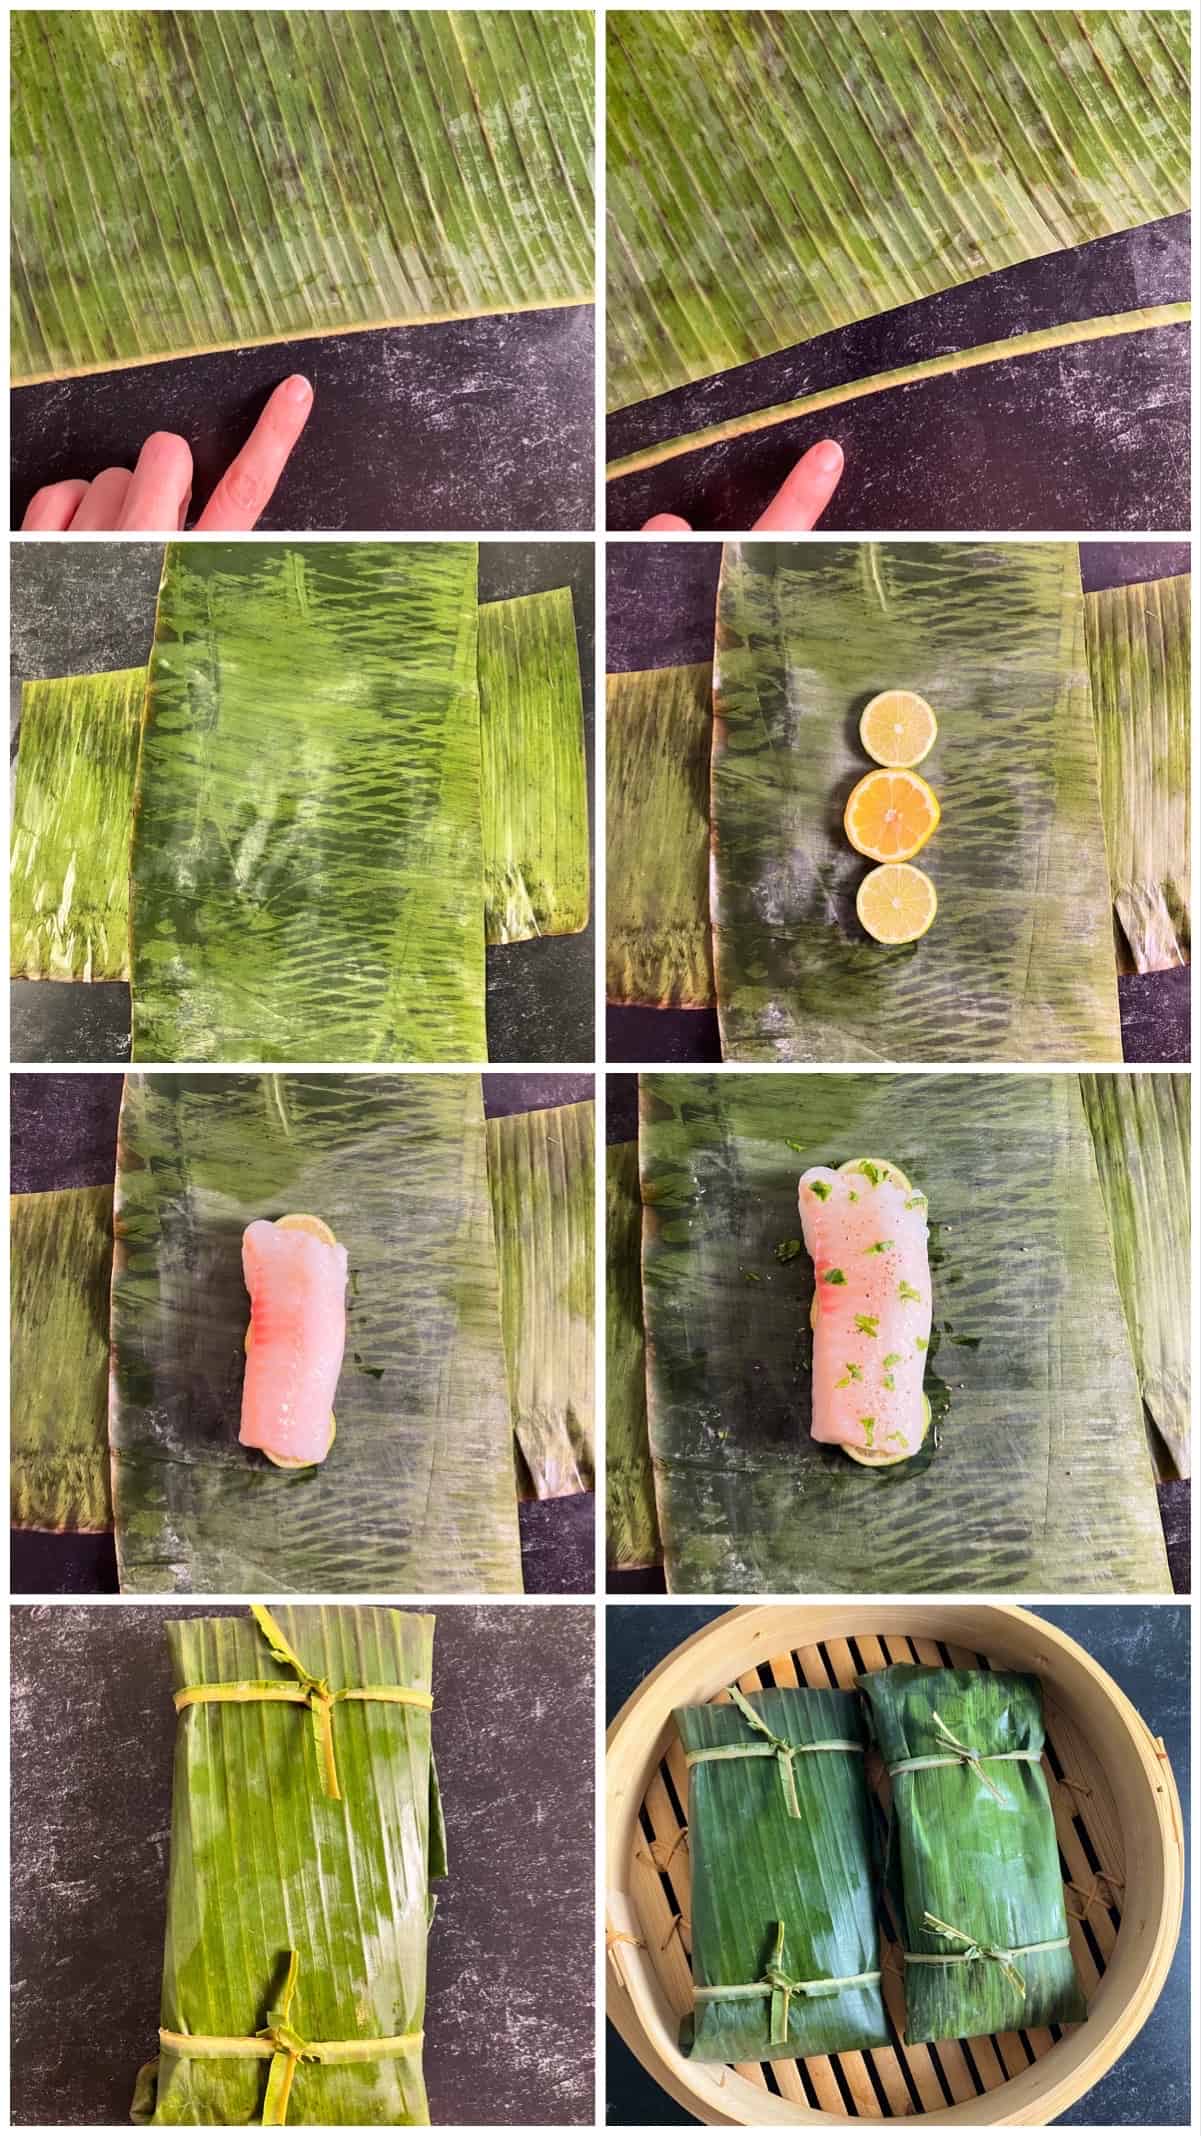 how to steam fish in banana leaves